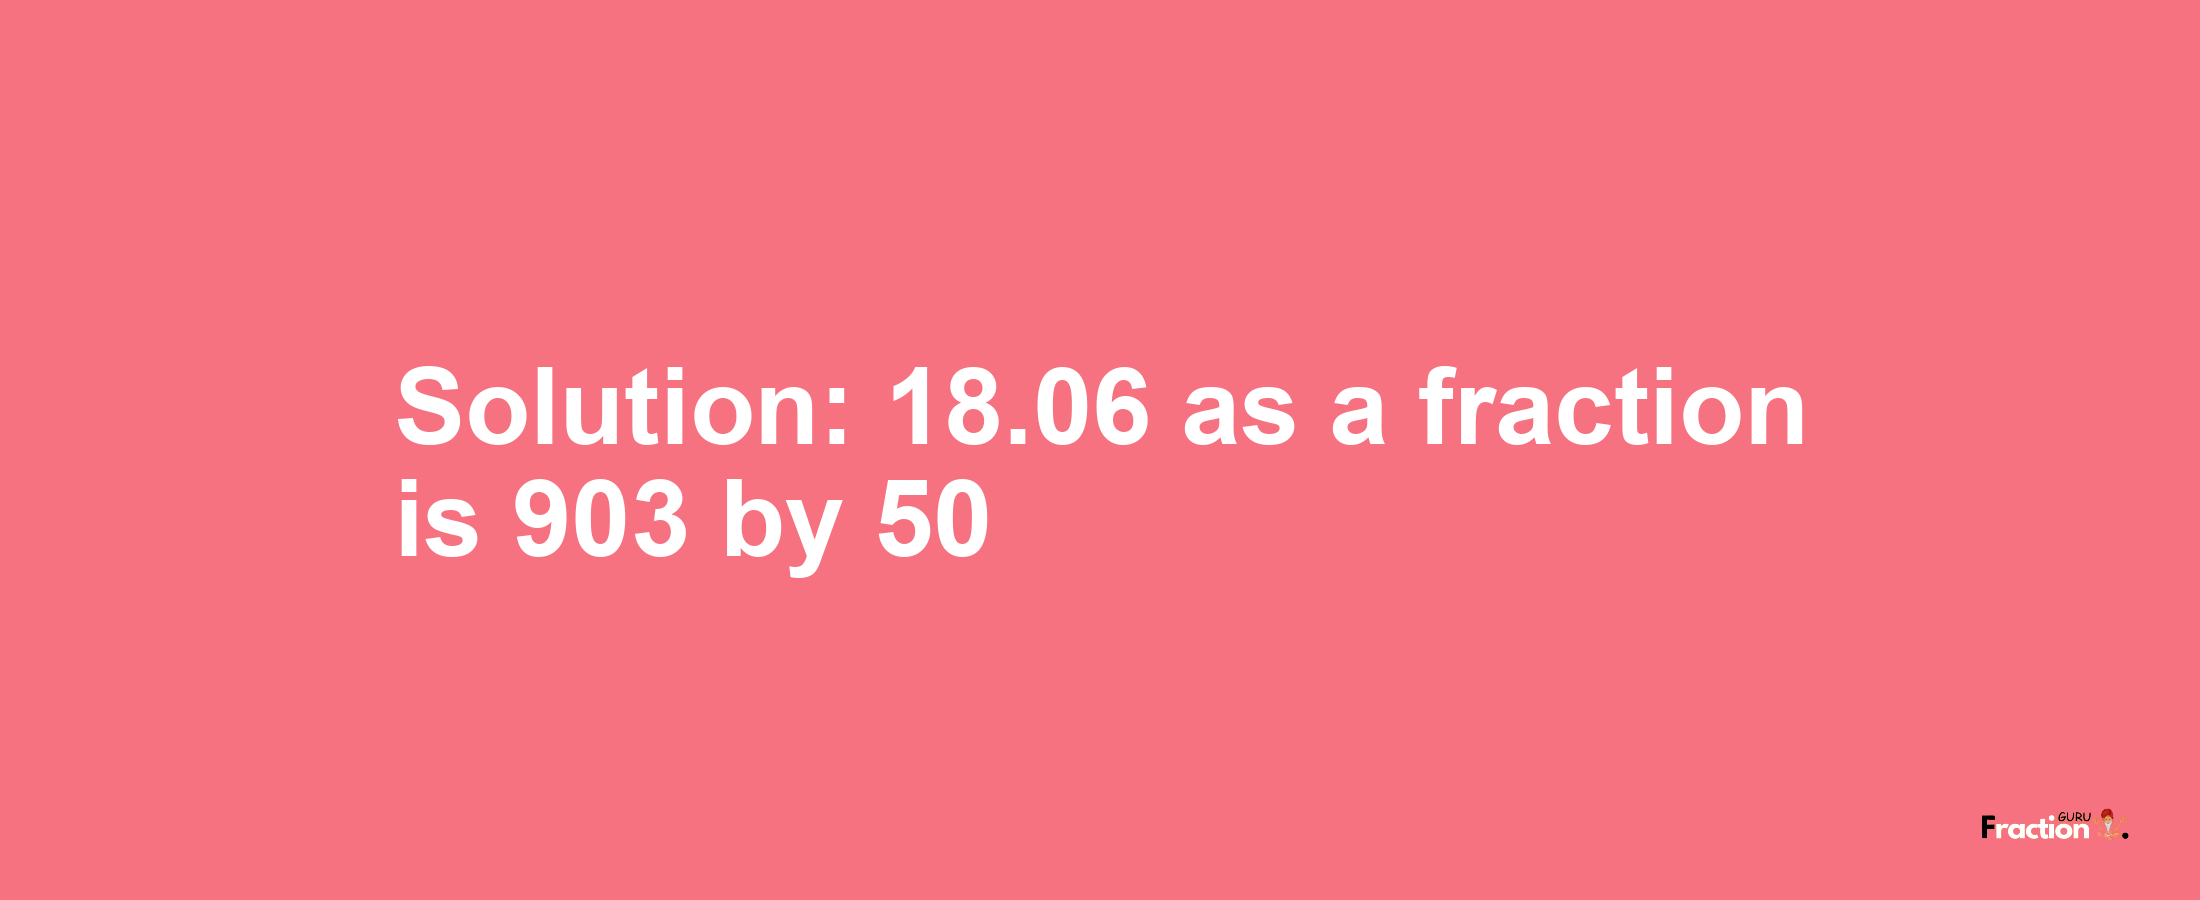 Solution:18.06 as a fraction is 903/50